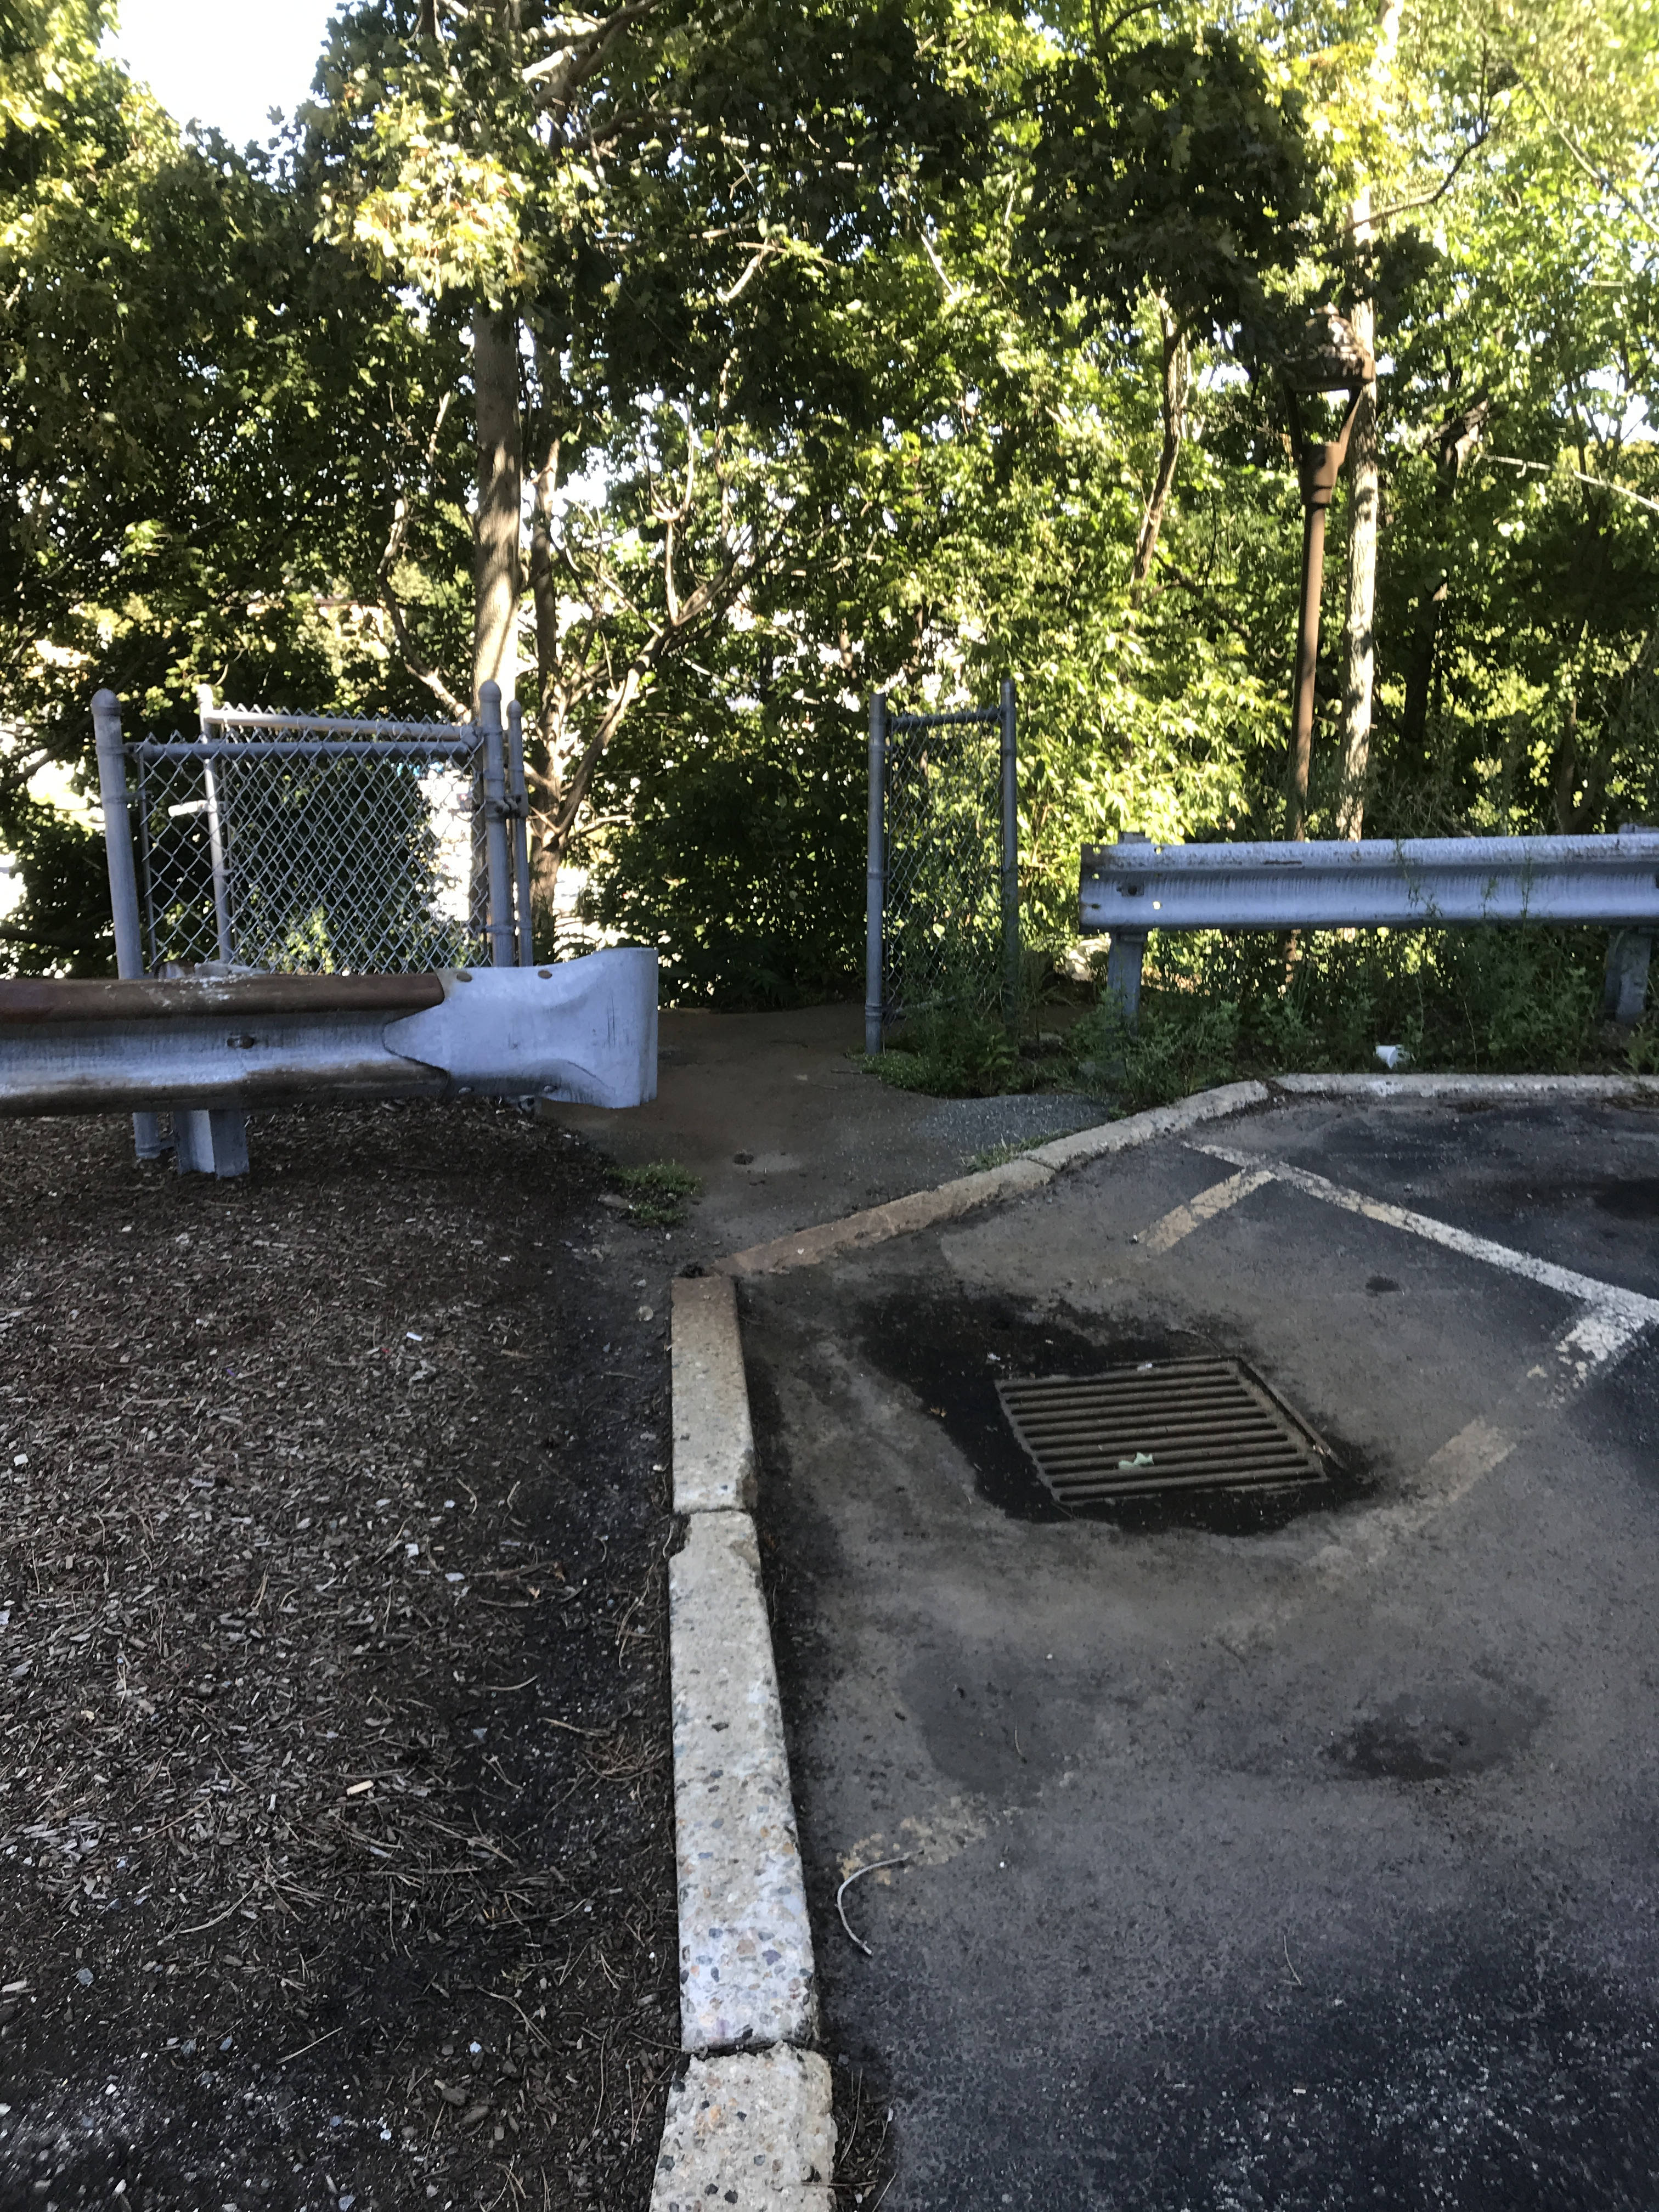 A small break between two guard rails reveals two freestanding sections of fence with an open gate between them. In front of the opening is a storm drain with a muddy puddle drying around it.